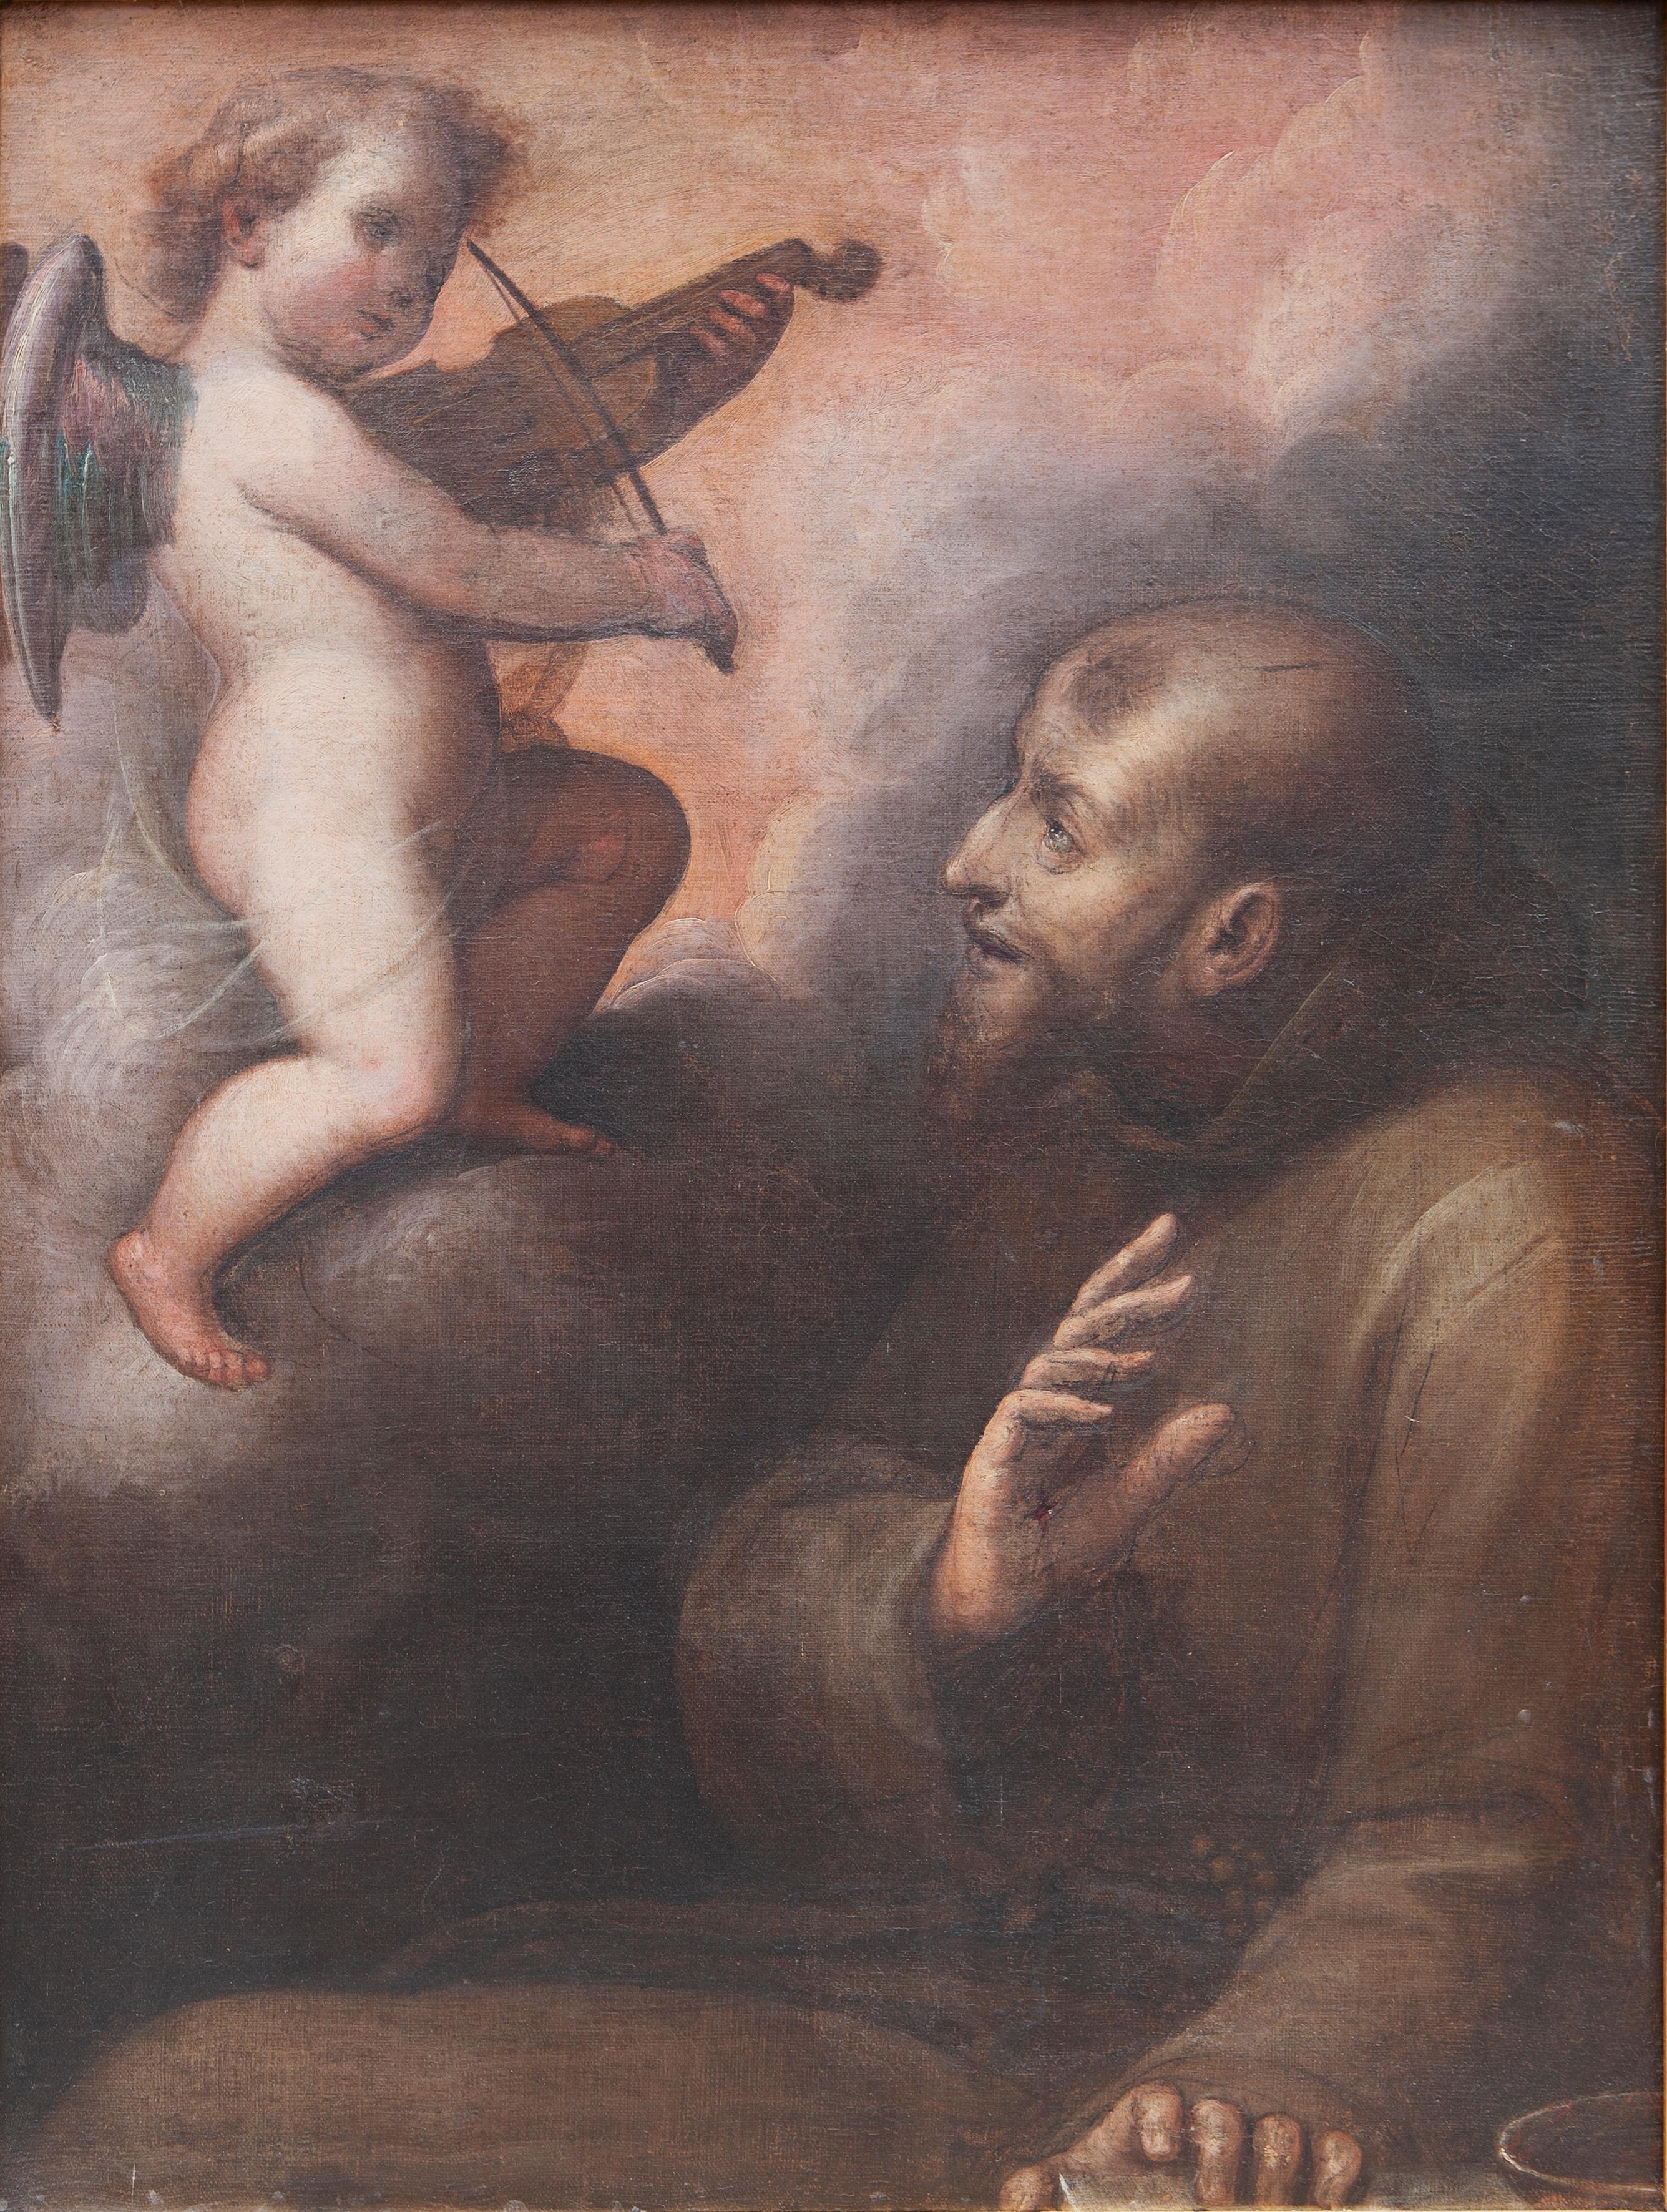 Saint Francis of Assisi comforted by an angel - Painting by Guglielmo Caccia said the Moncalvo (Montabone, 1568 - Moncalvo, 1625)